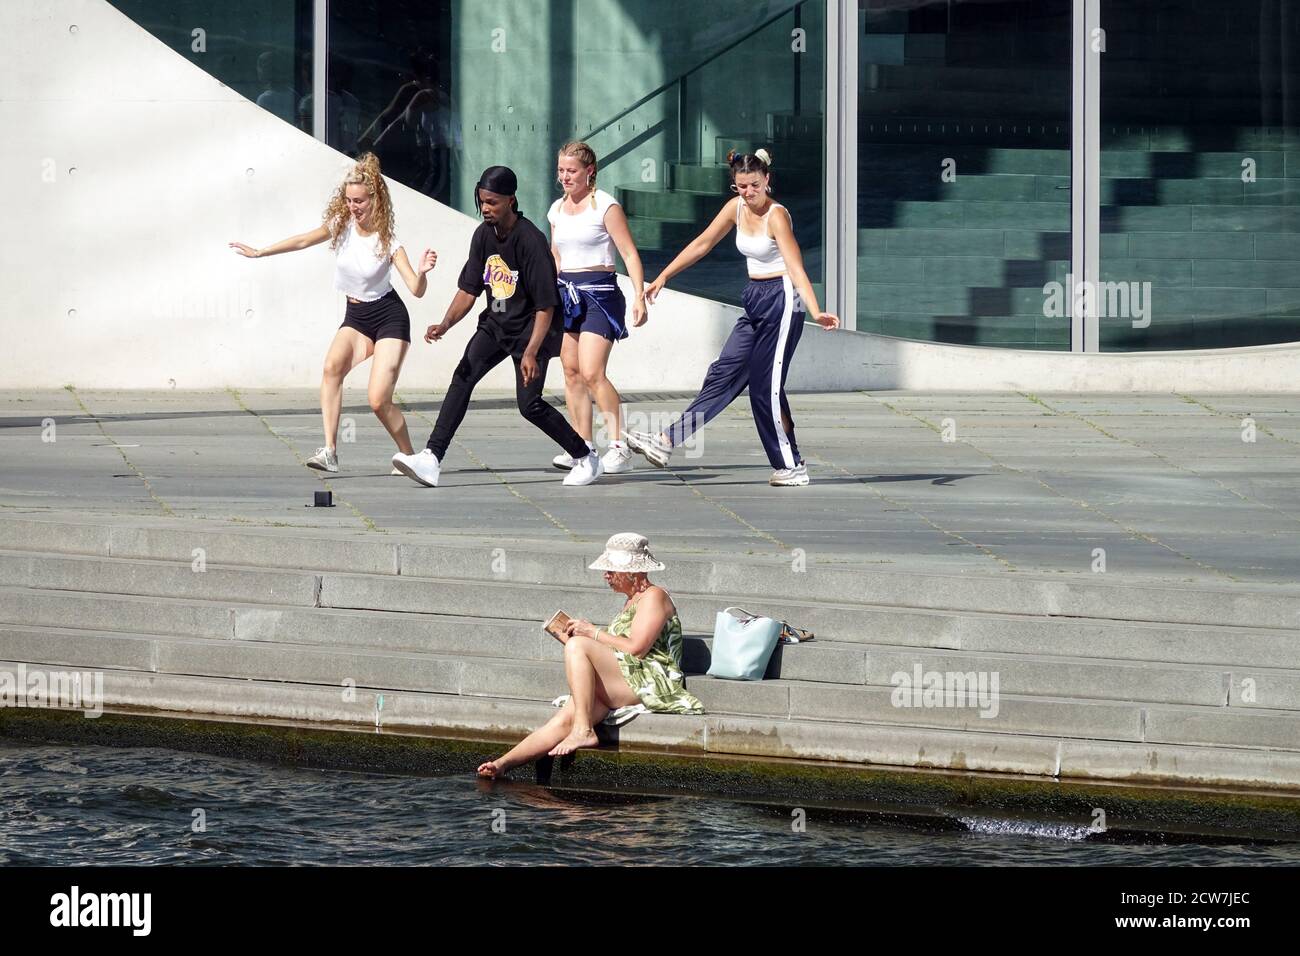 Berlin daily life The dance group rehearses on the banks of the Spree river Berlin Germany dancing Stock Photo